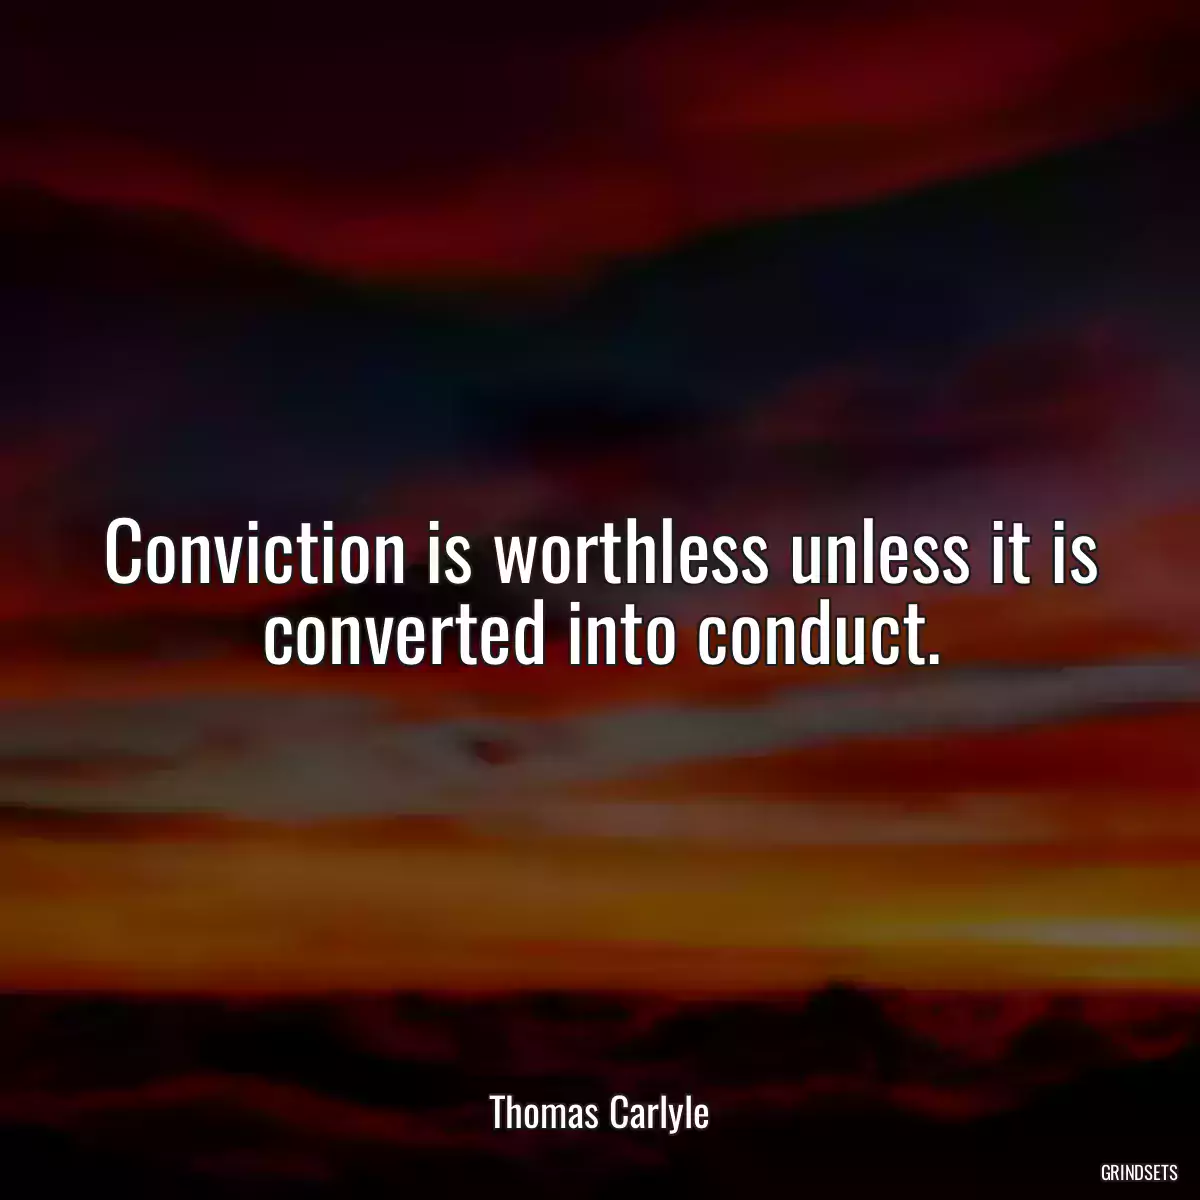 Conviction is worthless unless it is converted into conduct.